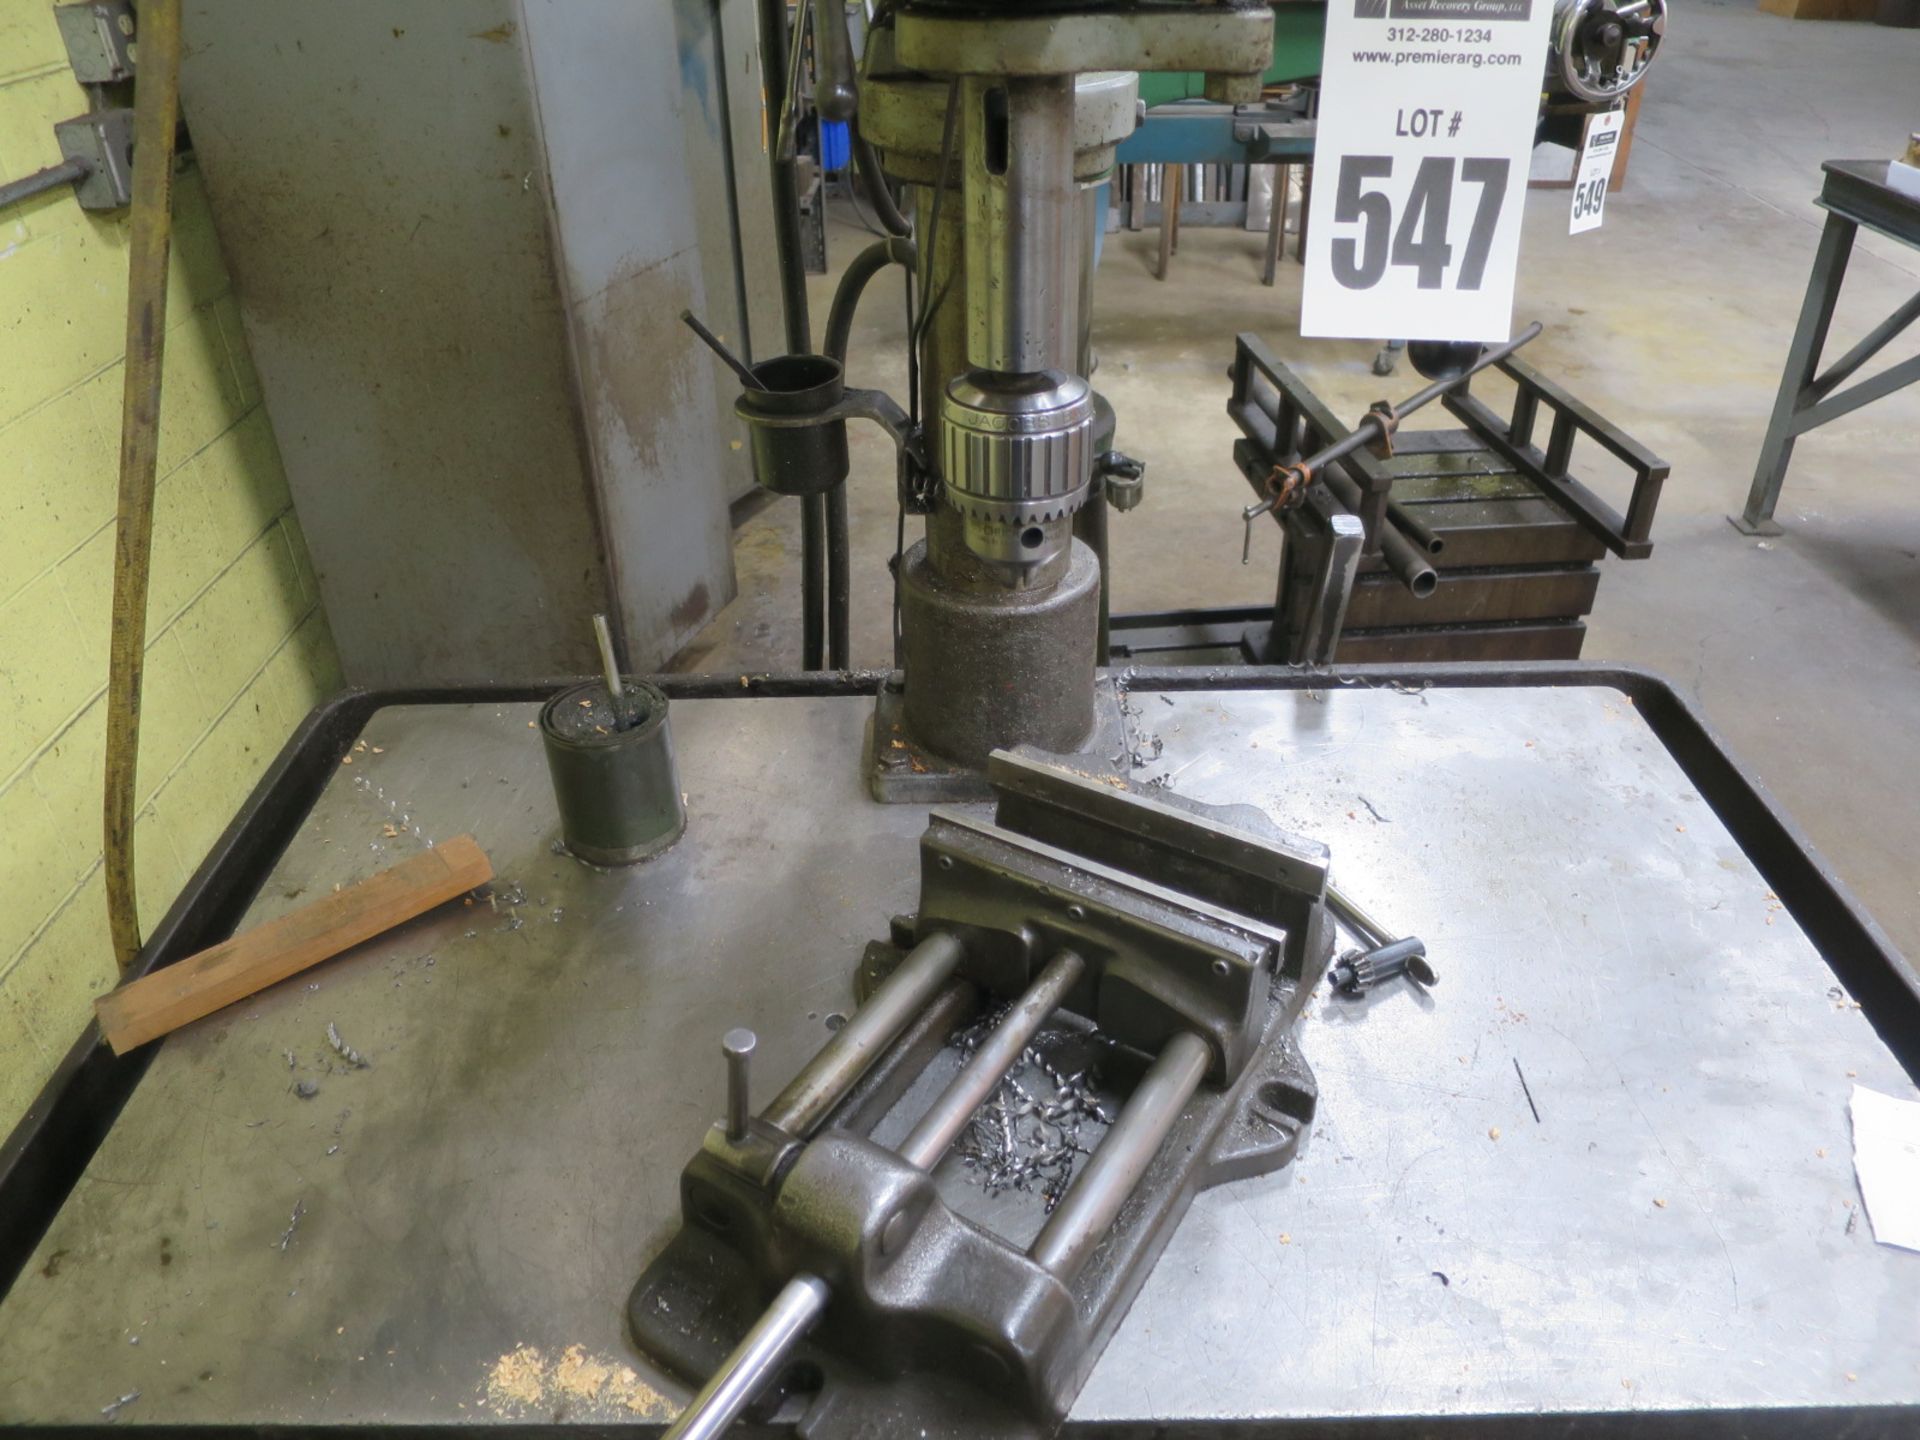 Clausing Series 22V 20" Variable Speed Drill Press, Sn 501841 With Jacobs Chuck and vice - Image 4 of 4